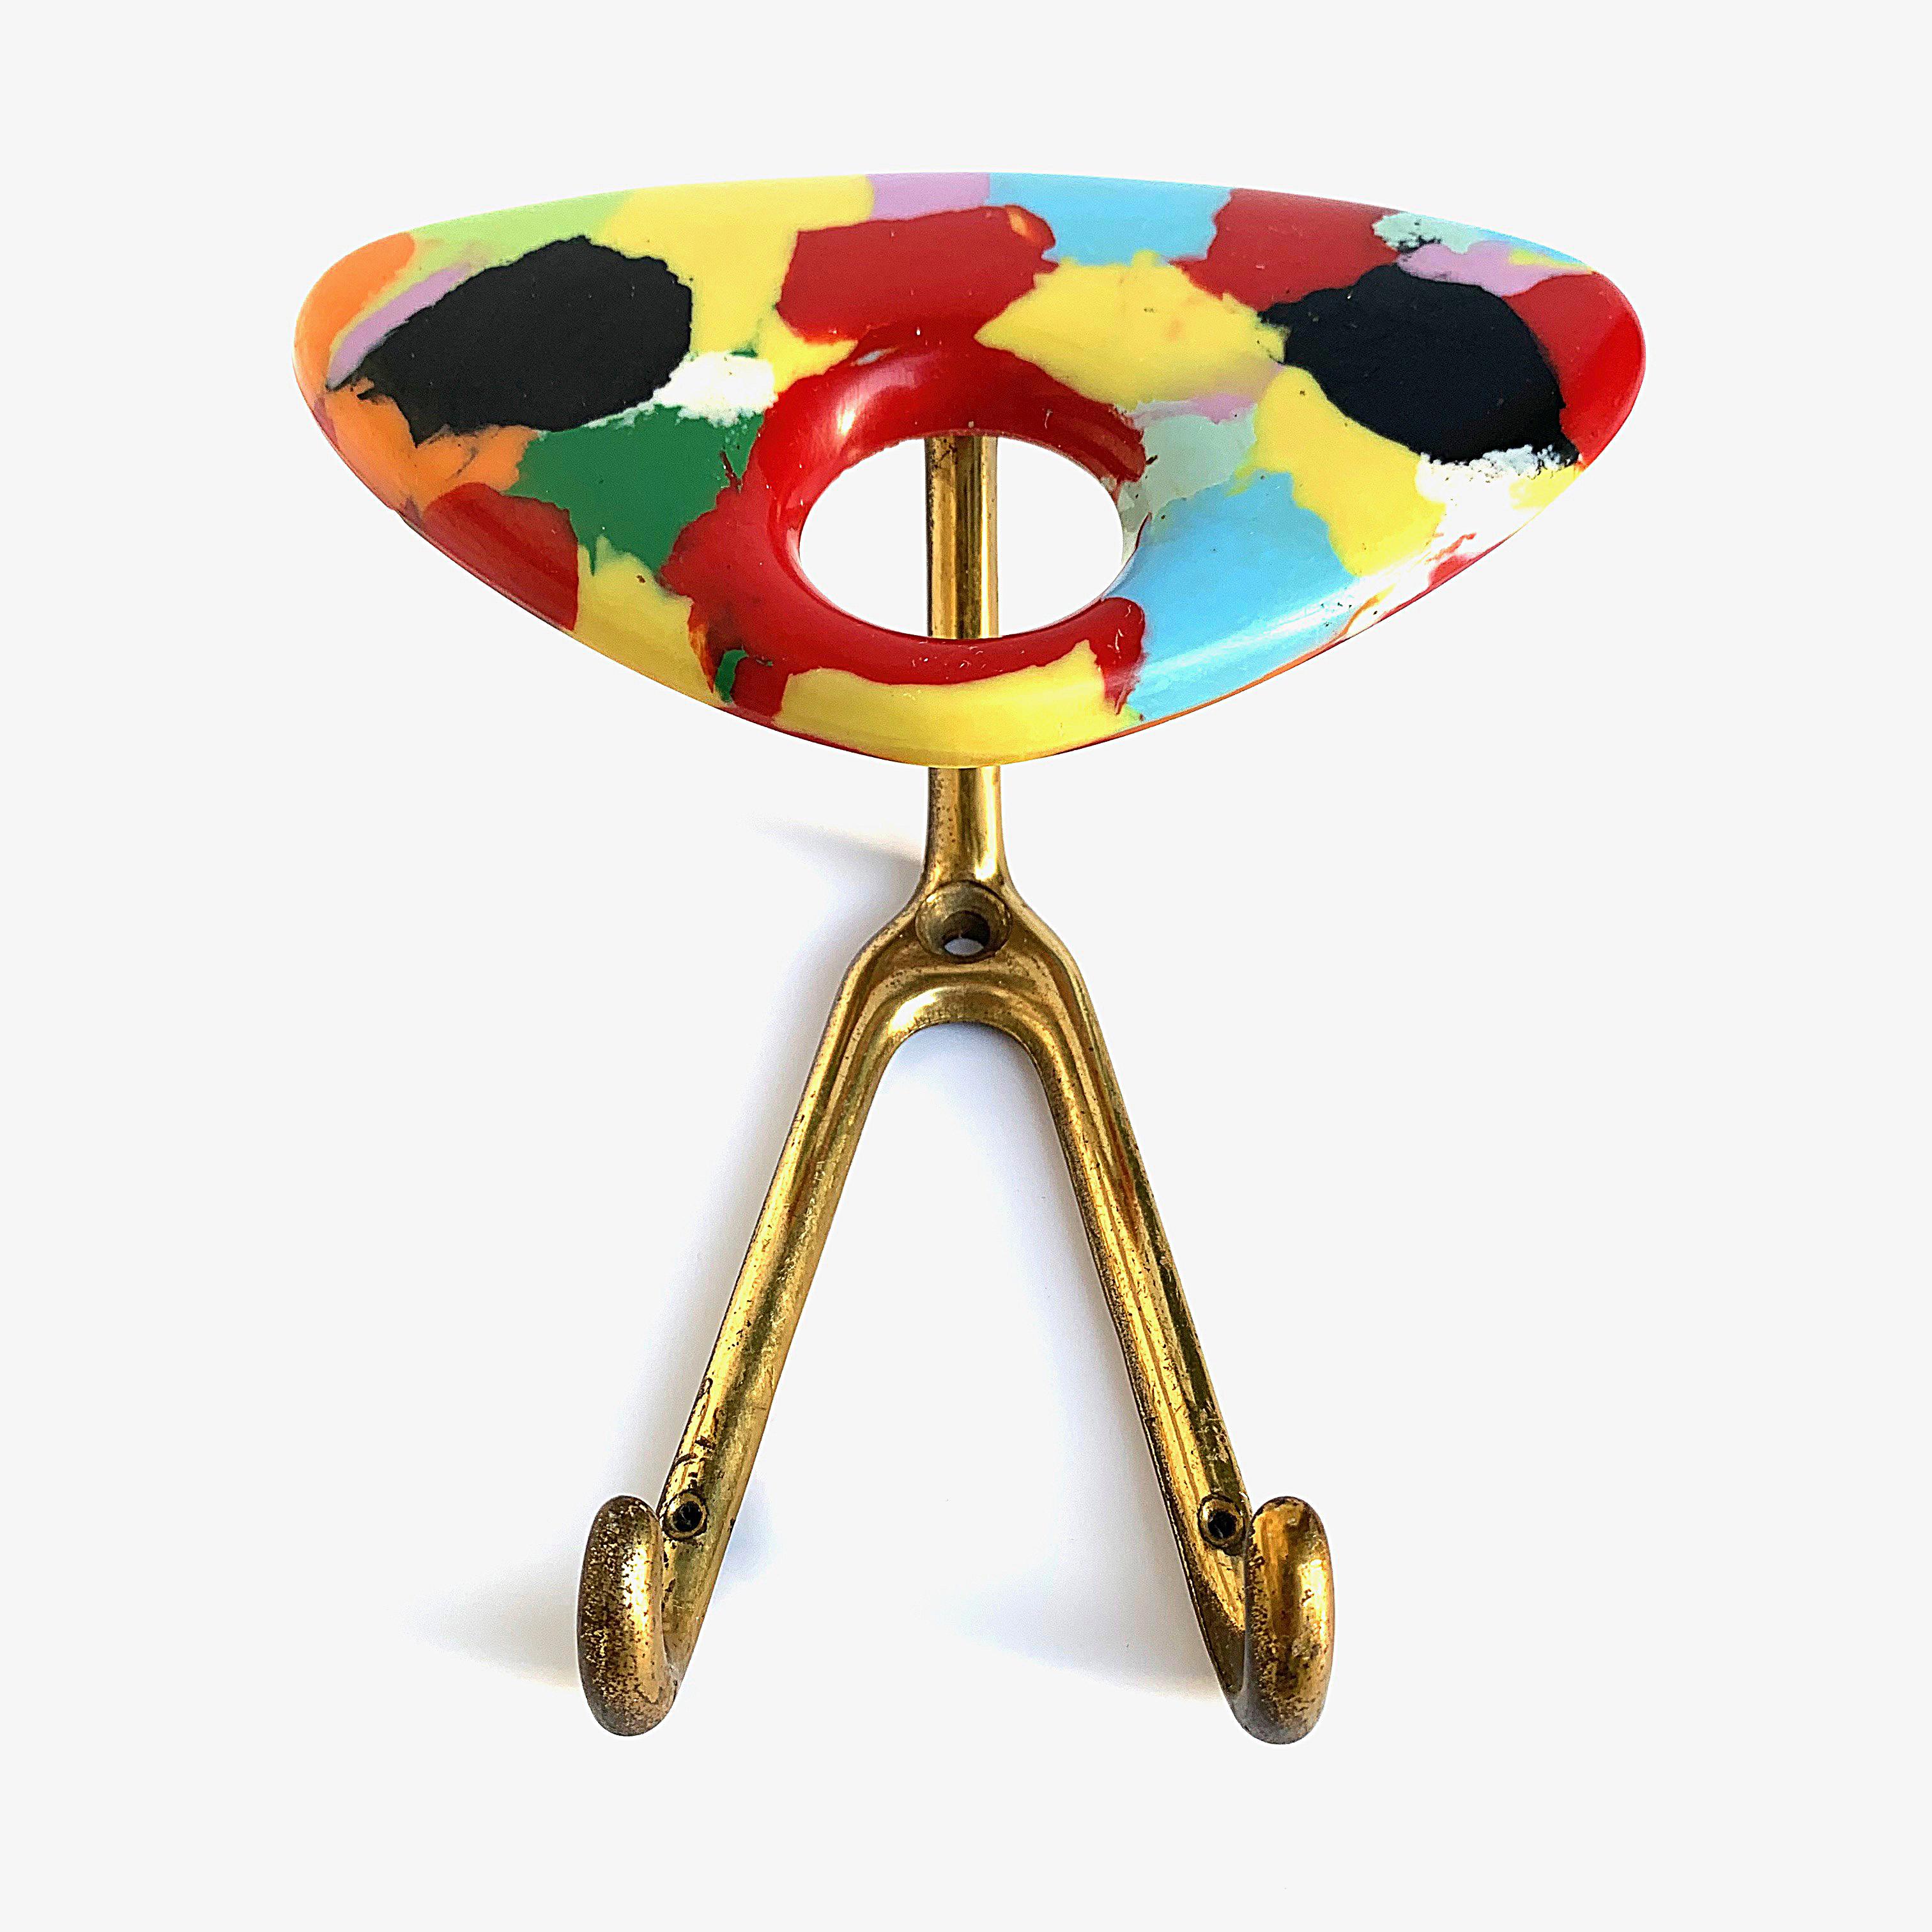 Italian Coat Hanger Made of Multicolored Plastic and Brass, Italy, 1950s